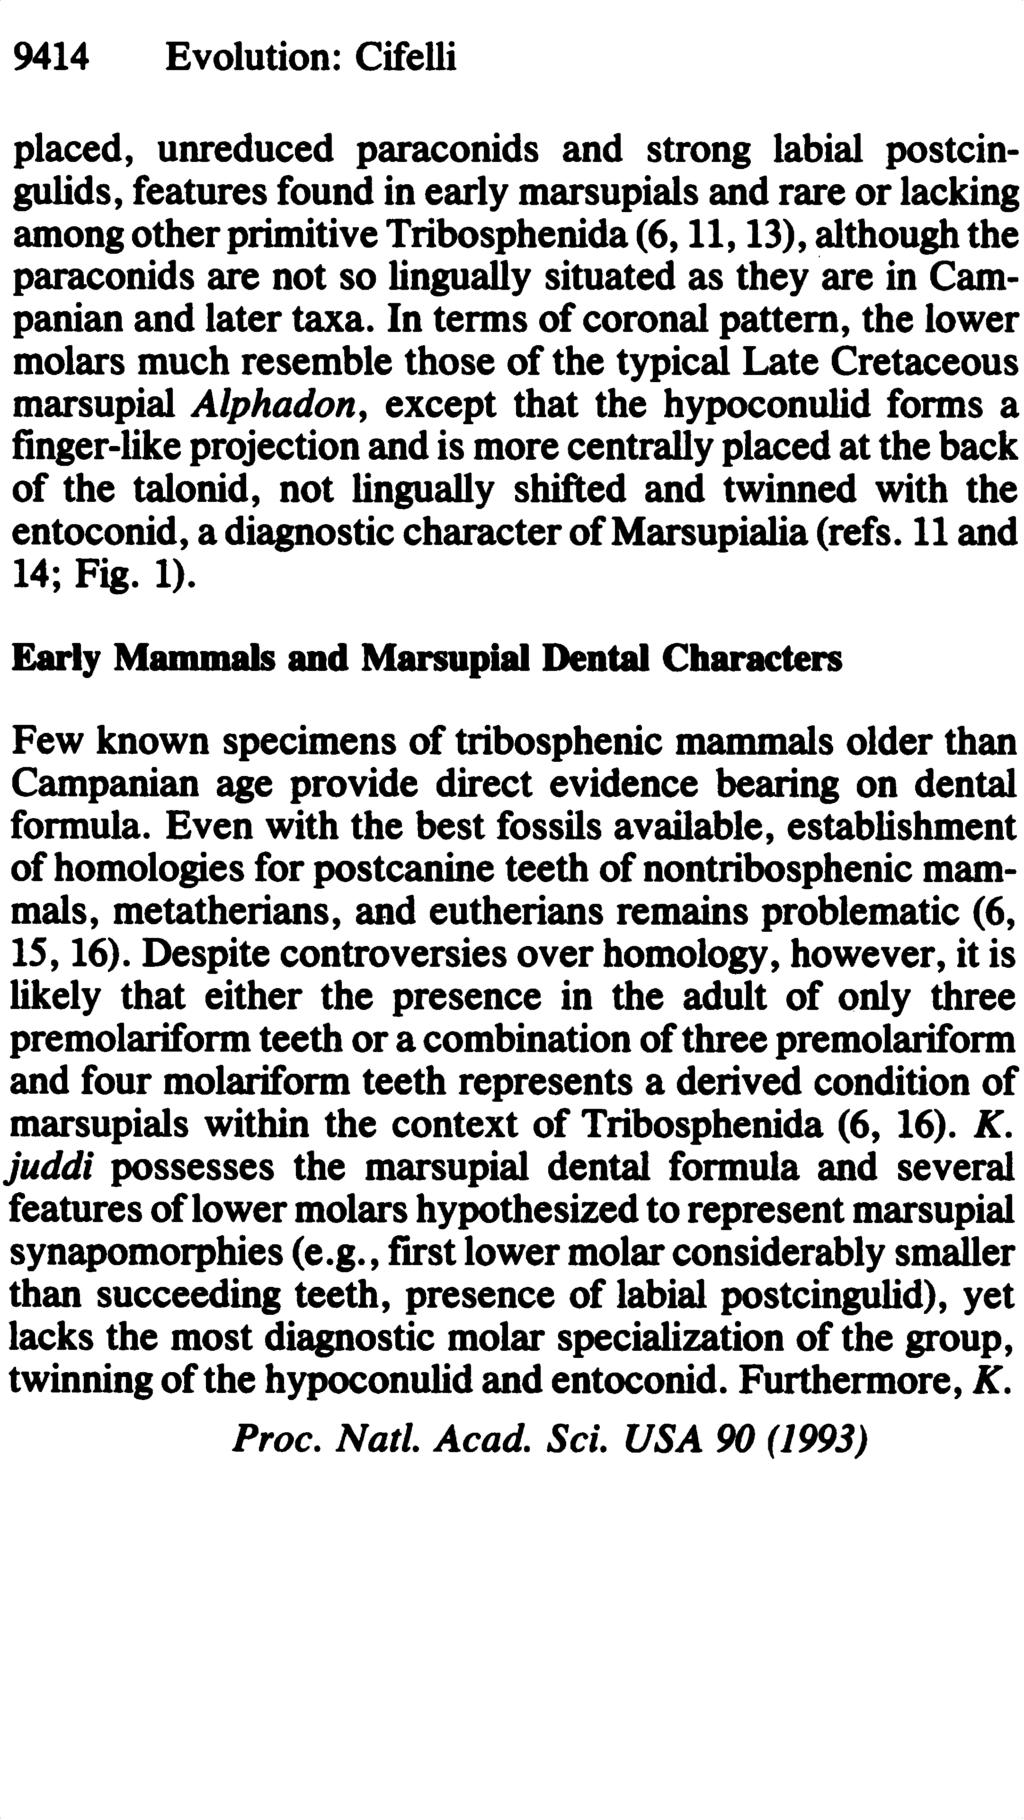 9414 Evolution: Cifelli placed, unreduced paraconids and strong labial postcingulids, features found in early marsupials and rare or lacking among otherprimitive Tribosphenida (6, 11, 13), although